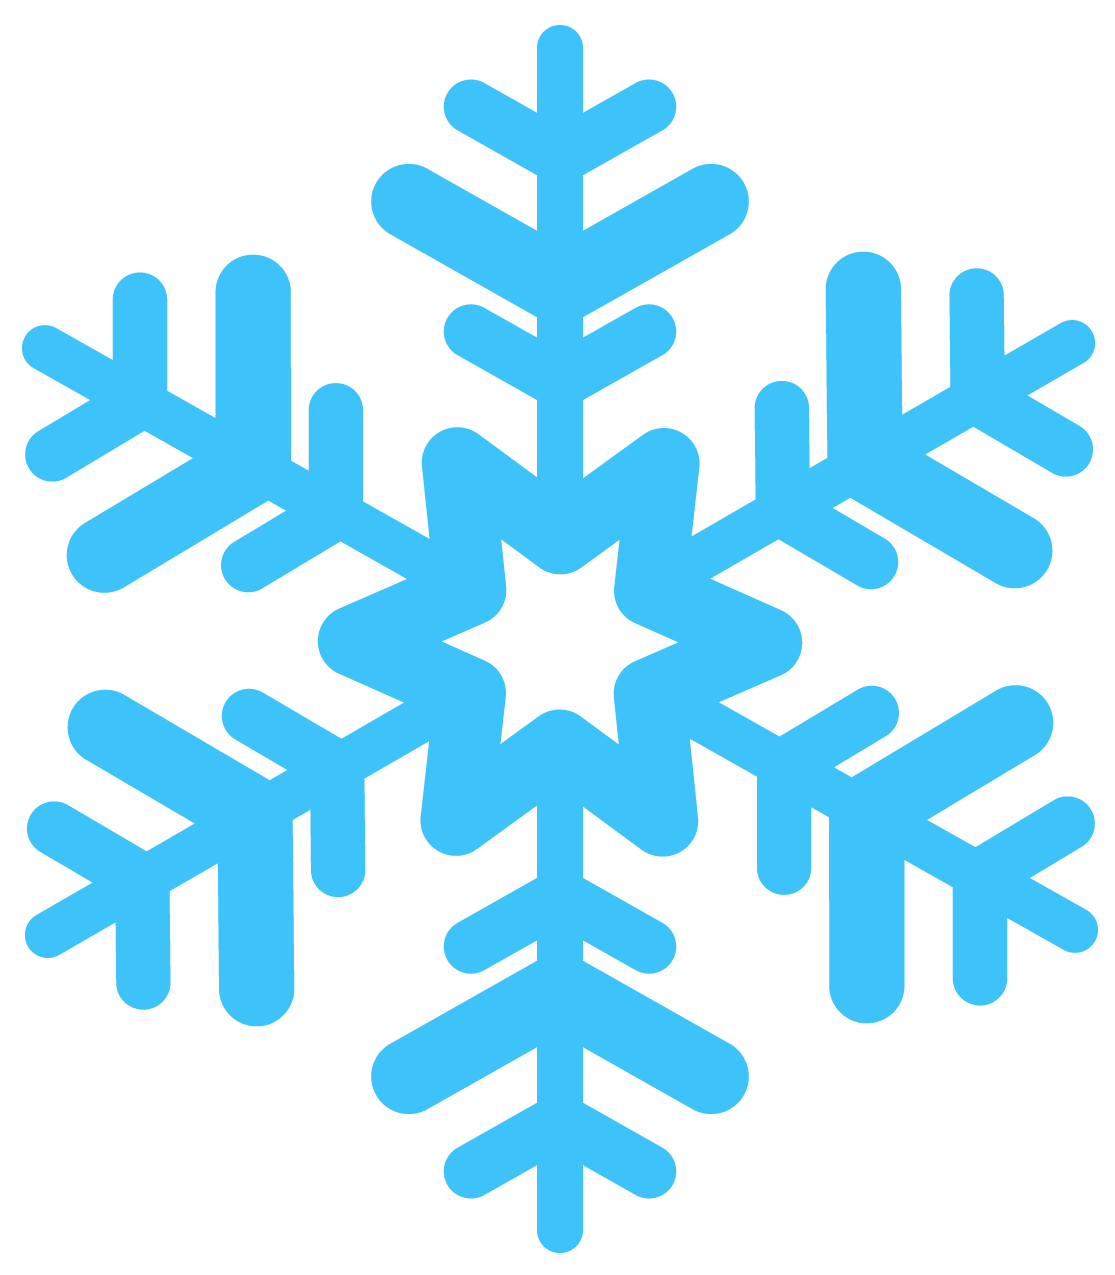 Blue Snowflakes PNG Free Download